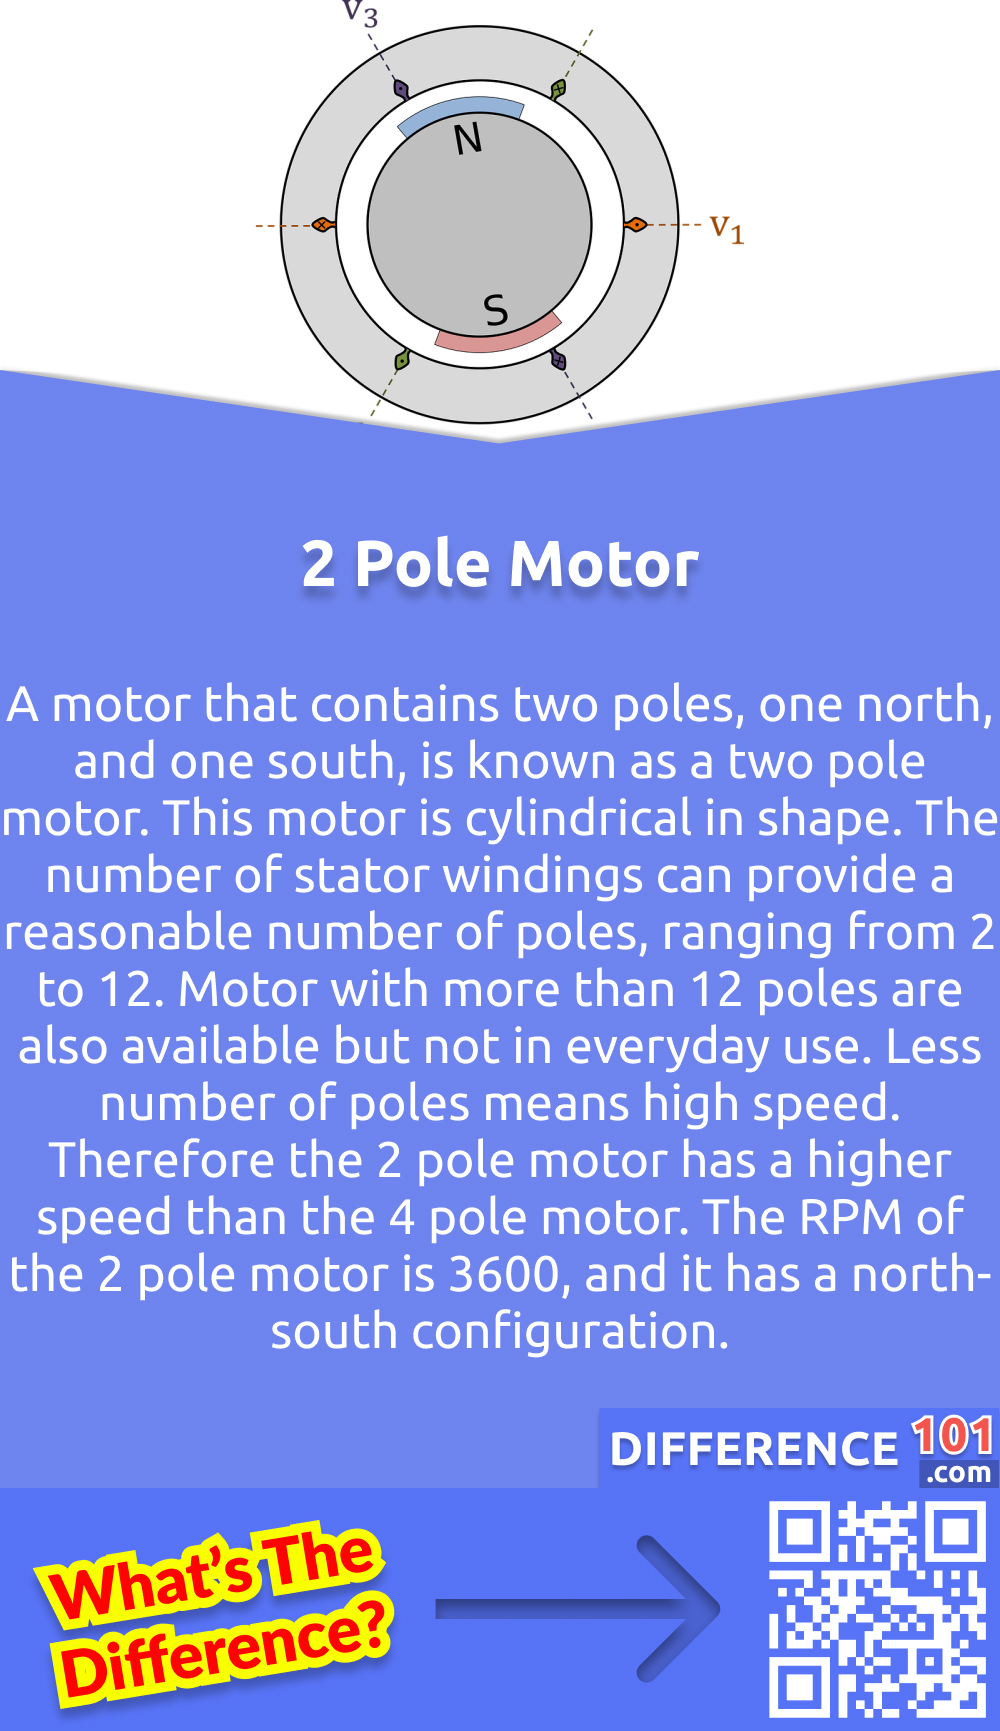 What is a 2 Pole Motor? A motor that contains two poles, one north, and one south, is known as a two pole motor. This motor is cylindrical in shape. The number of stator windings can provide a reasonable number of poles, ranging from 2 to 12. Motor with more than 12 poles are also available but not in everyday use. Less number of poles means high speed. Therefore the 2 pole motor has a higher speed than the 4 pole motor. The RPM of the 2 pole motor is 3600, and it has a north-south configuration. 